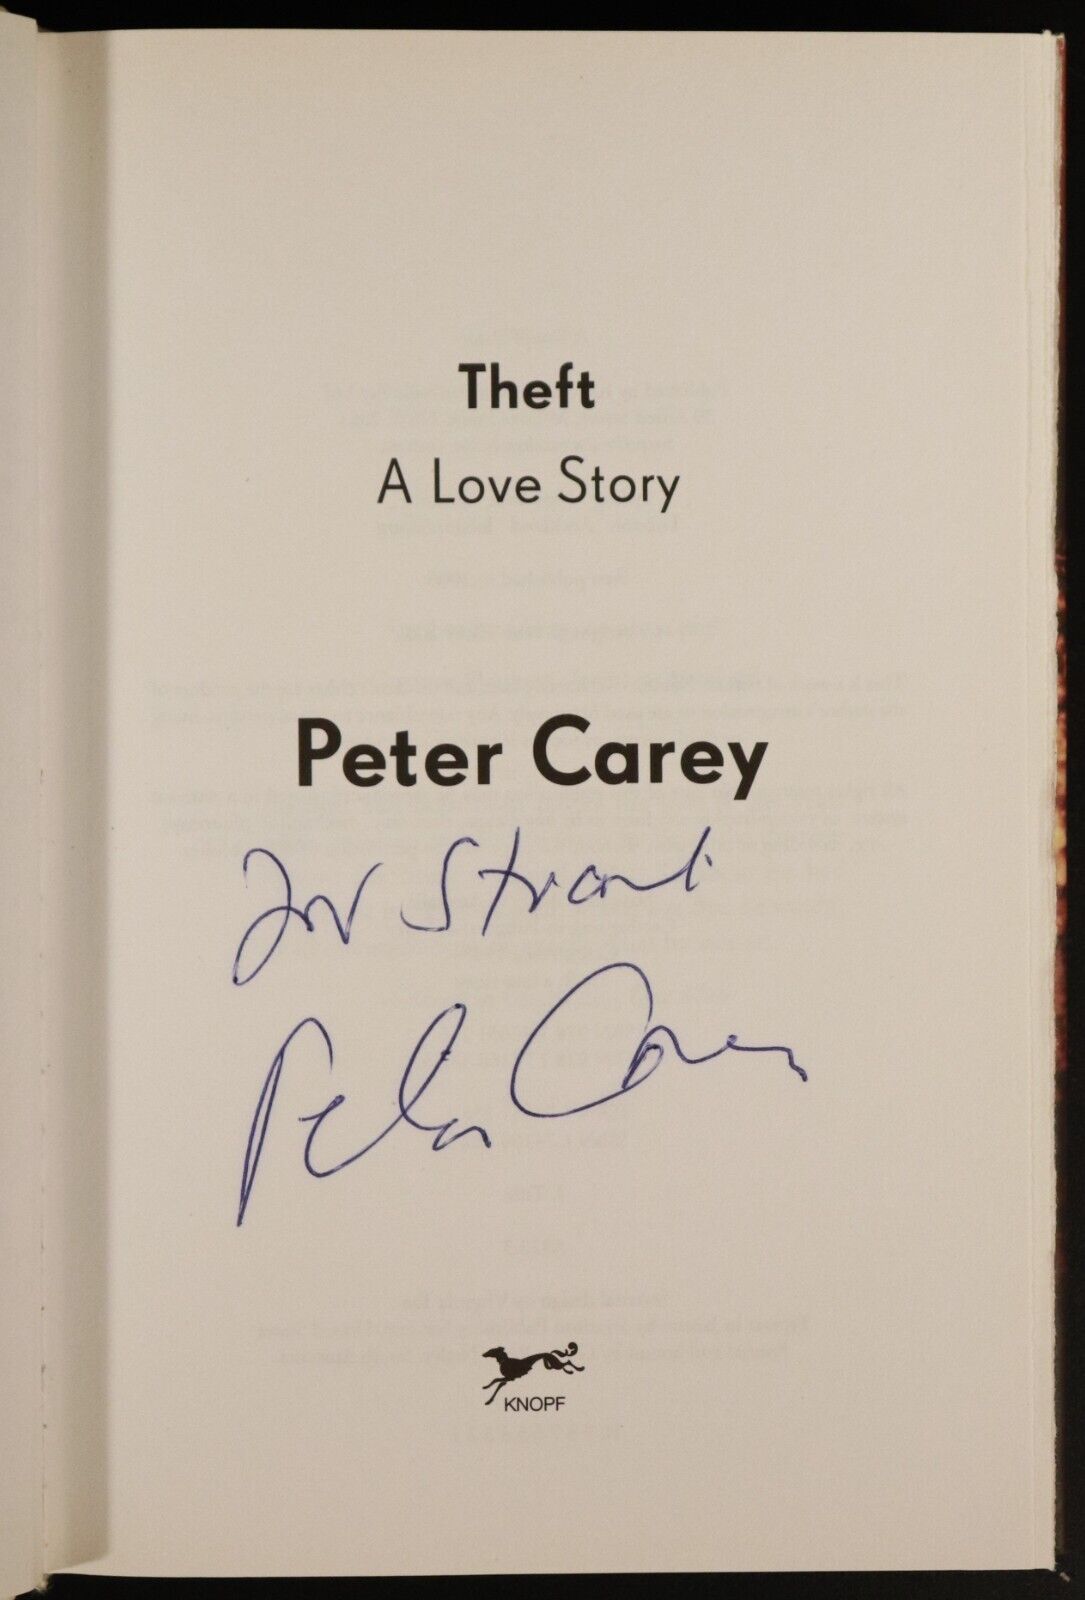 2006 Theft A Love Story by Peter Carey 1st Edition Signed by Author Fiction Book - 0